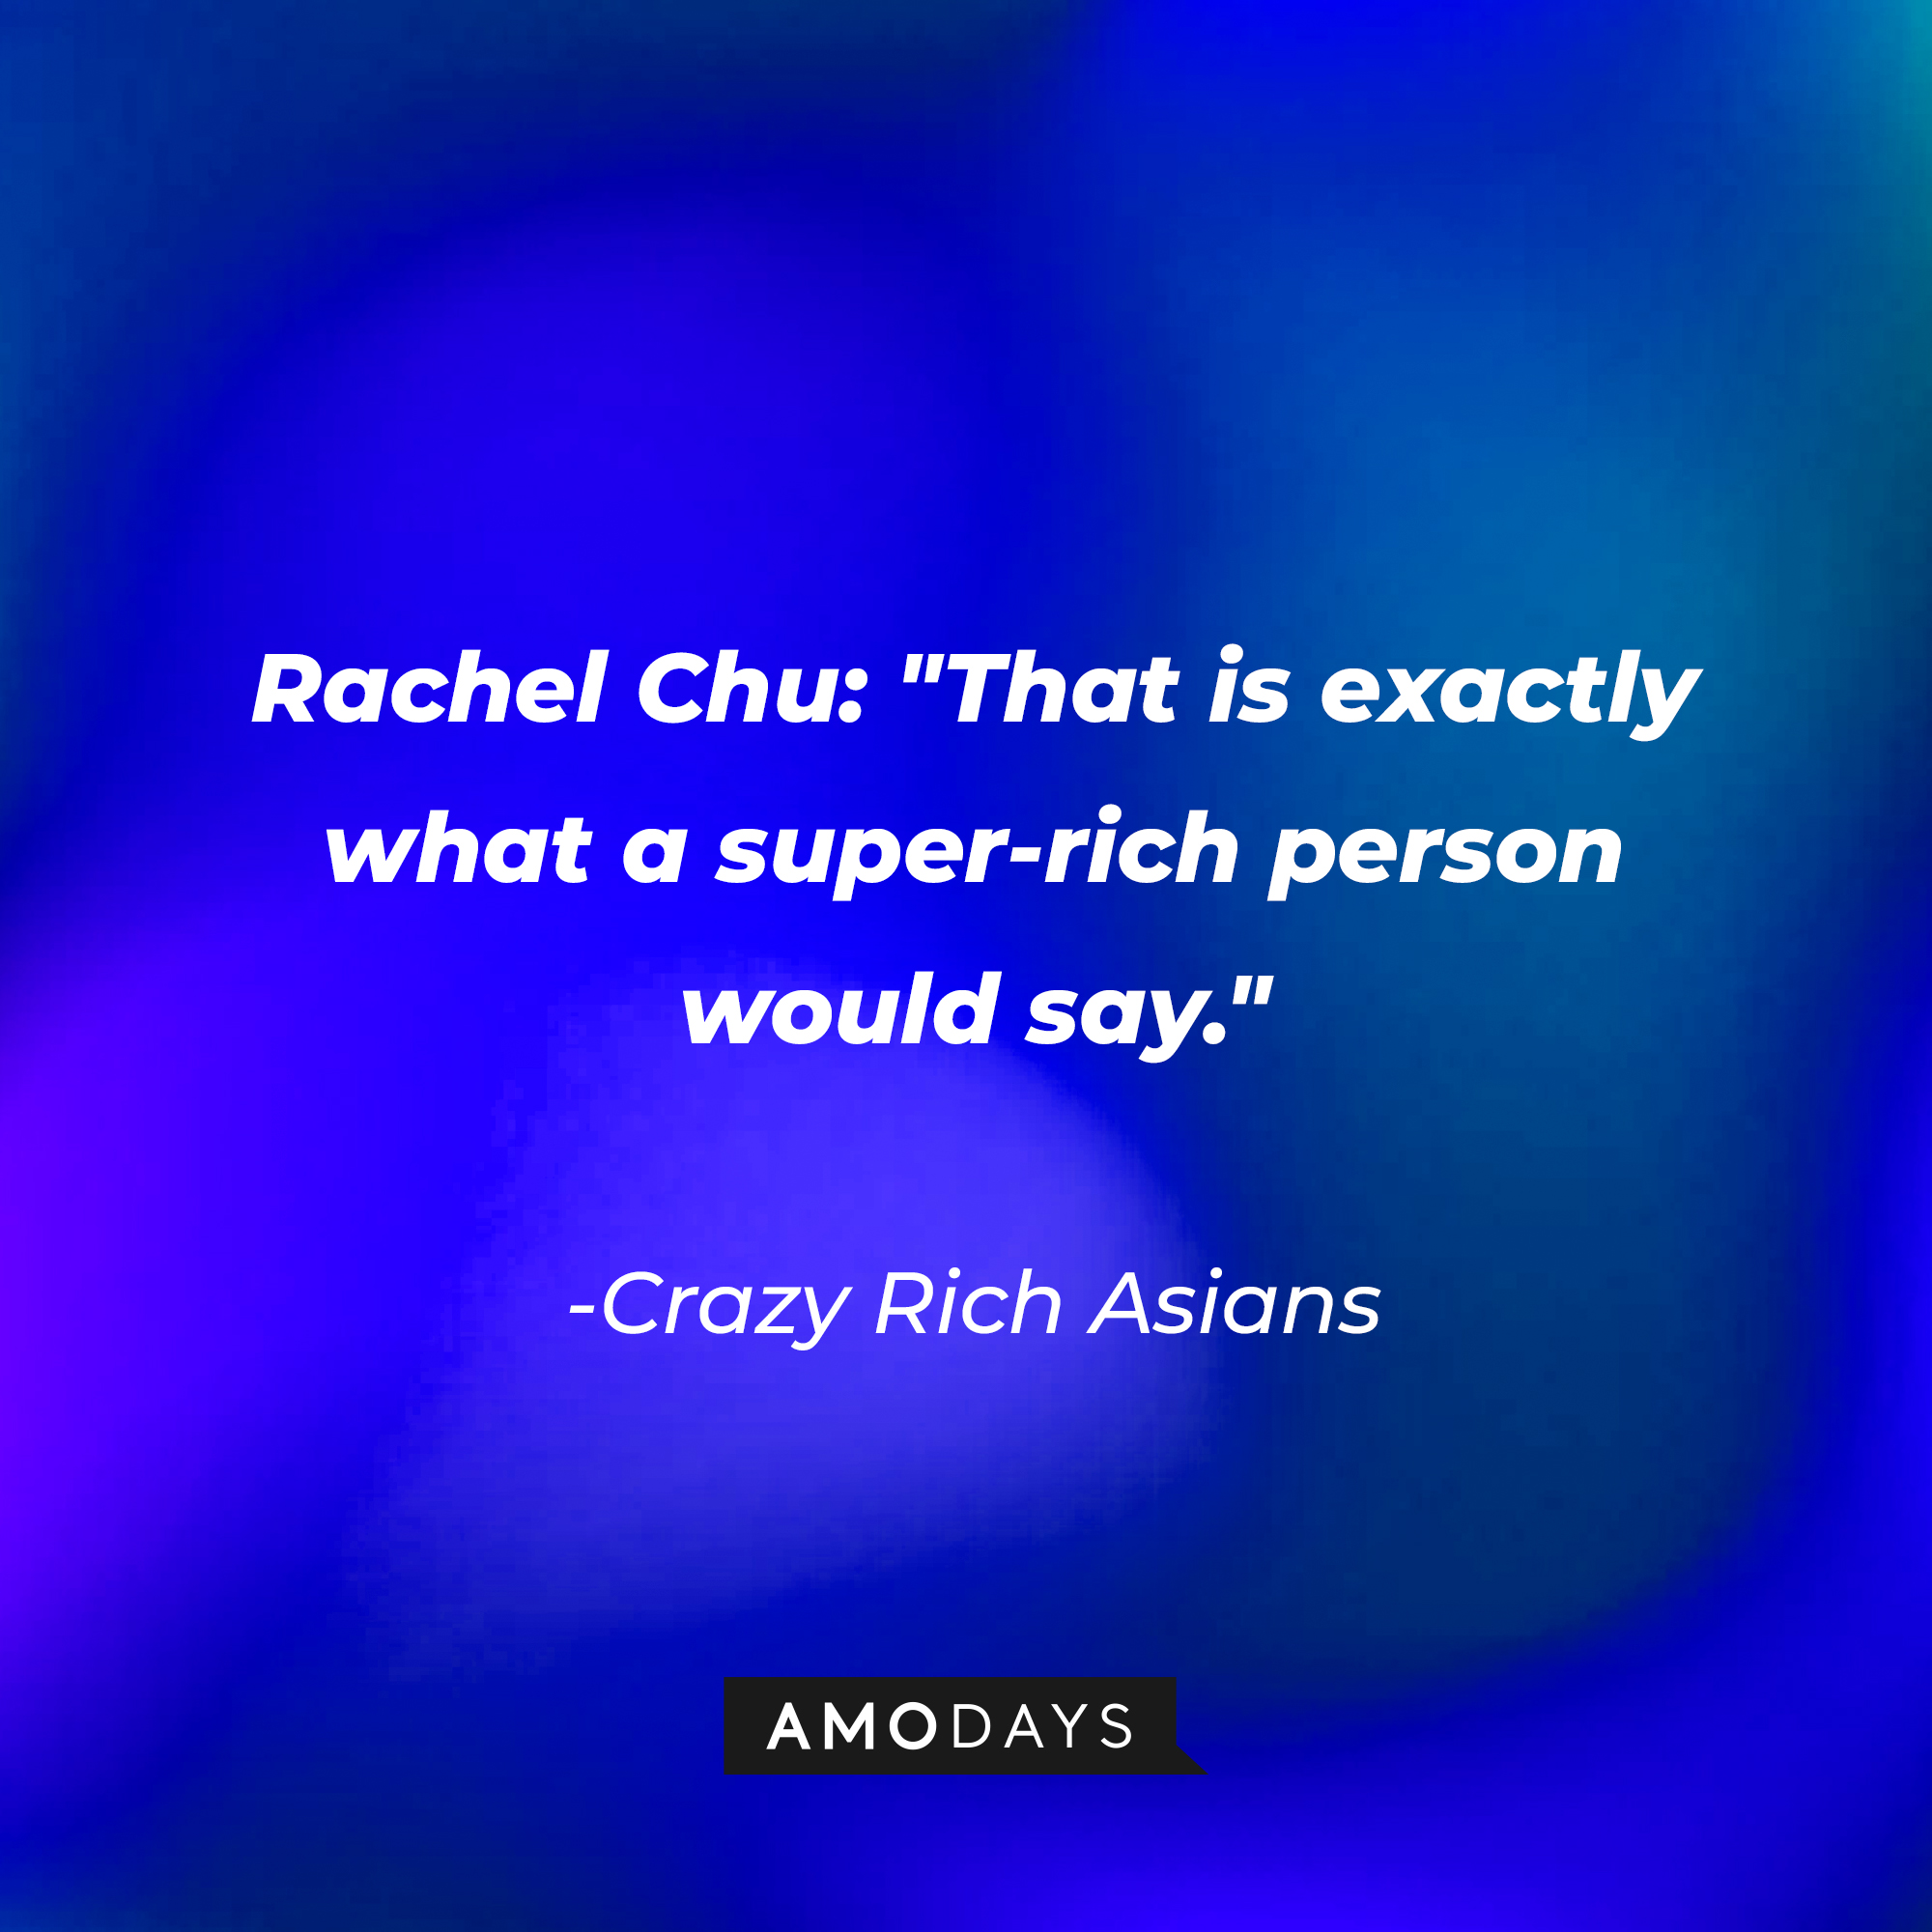 Rachel Chu's quote: "That is exactly what a super-rich person would say." | Source: AmoDays